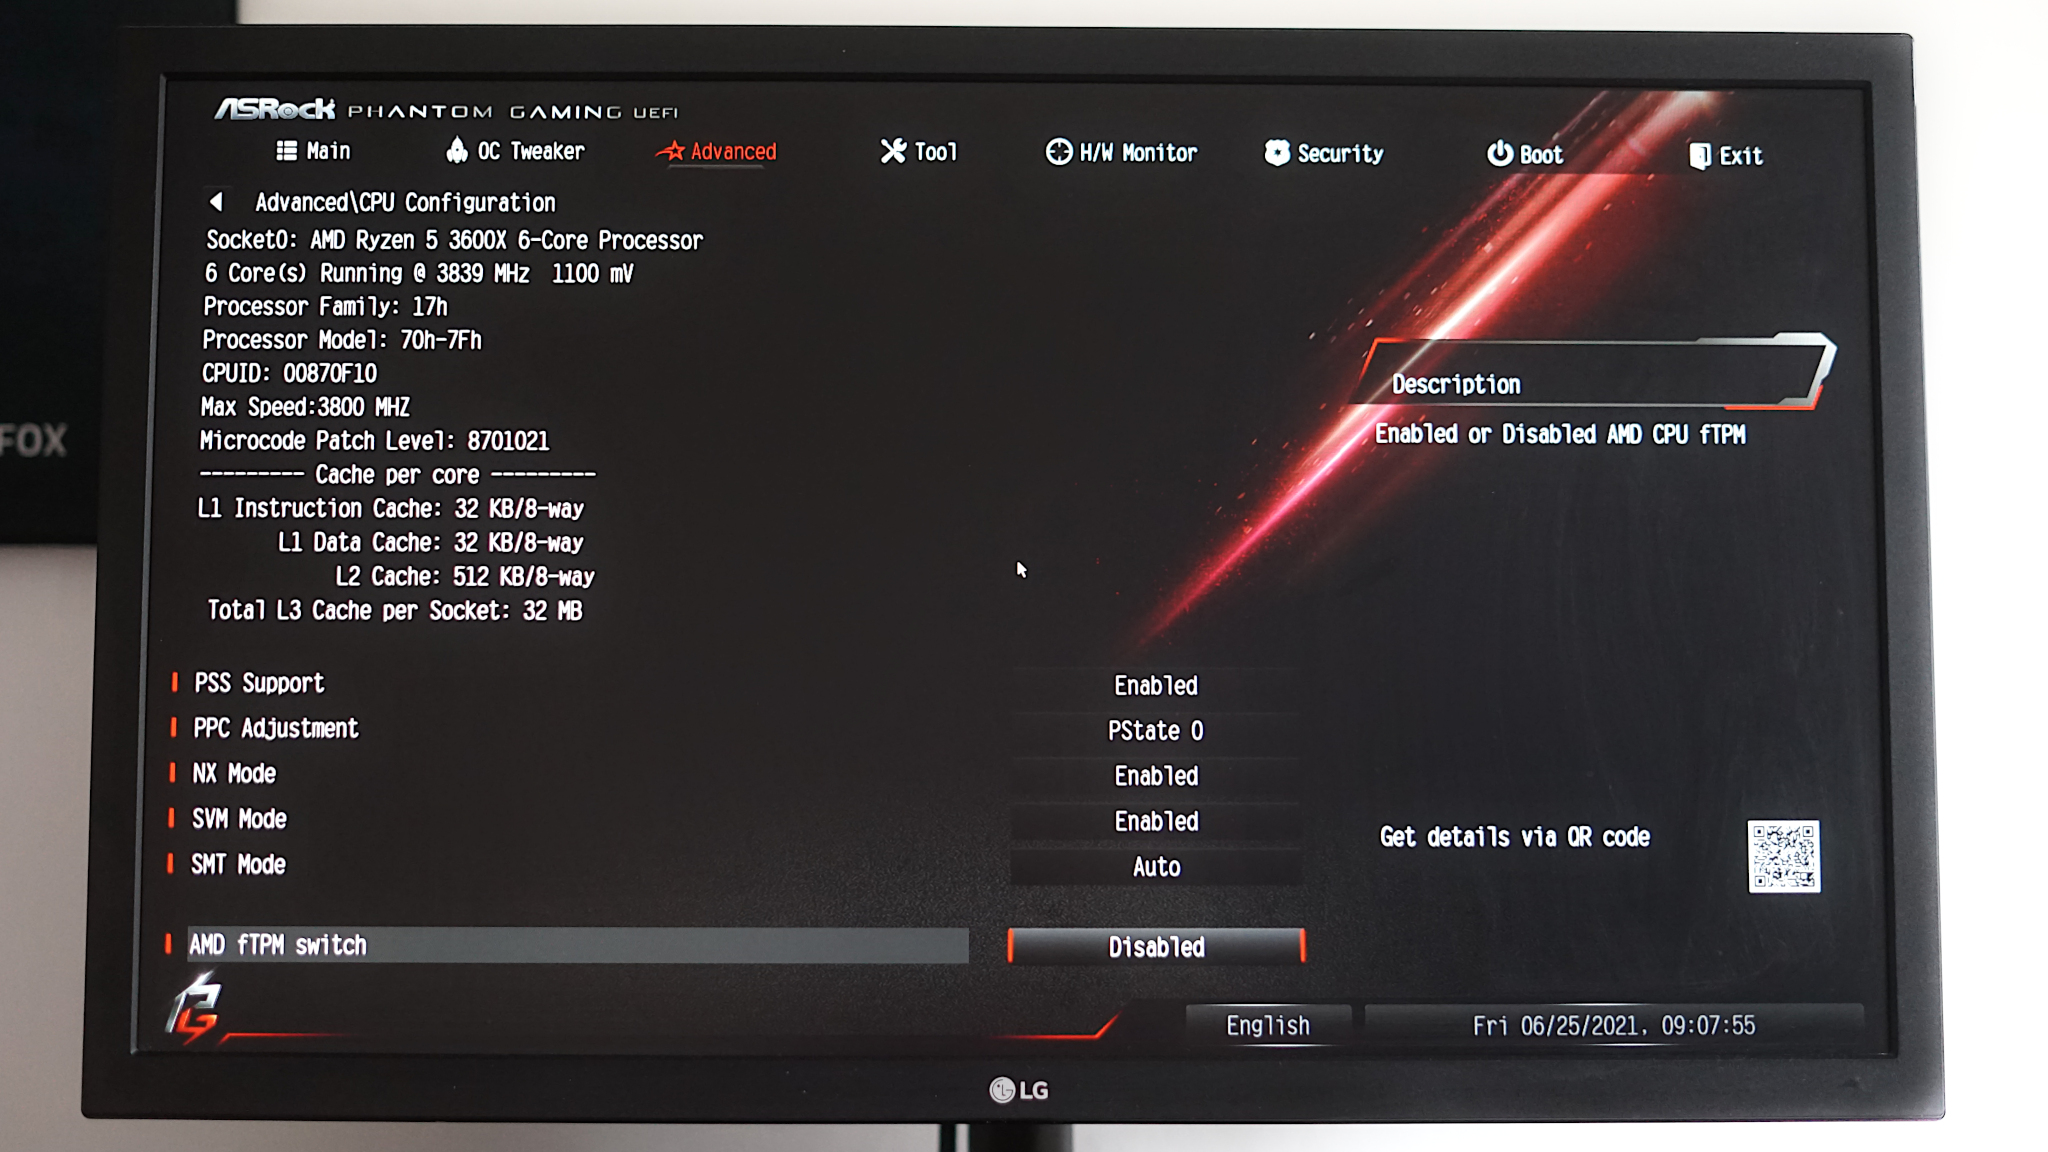 asus - What does the BIOS setting XHCI Pre-Boot Mode do? - Super User